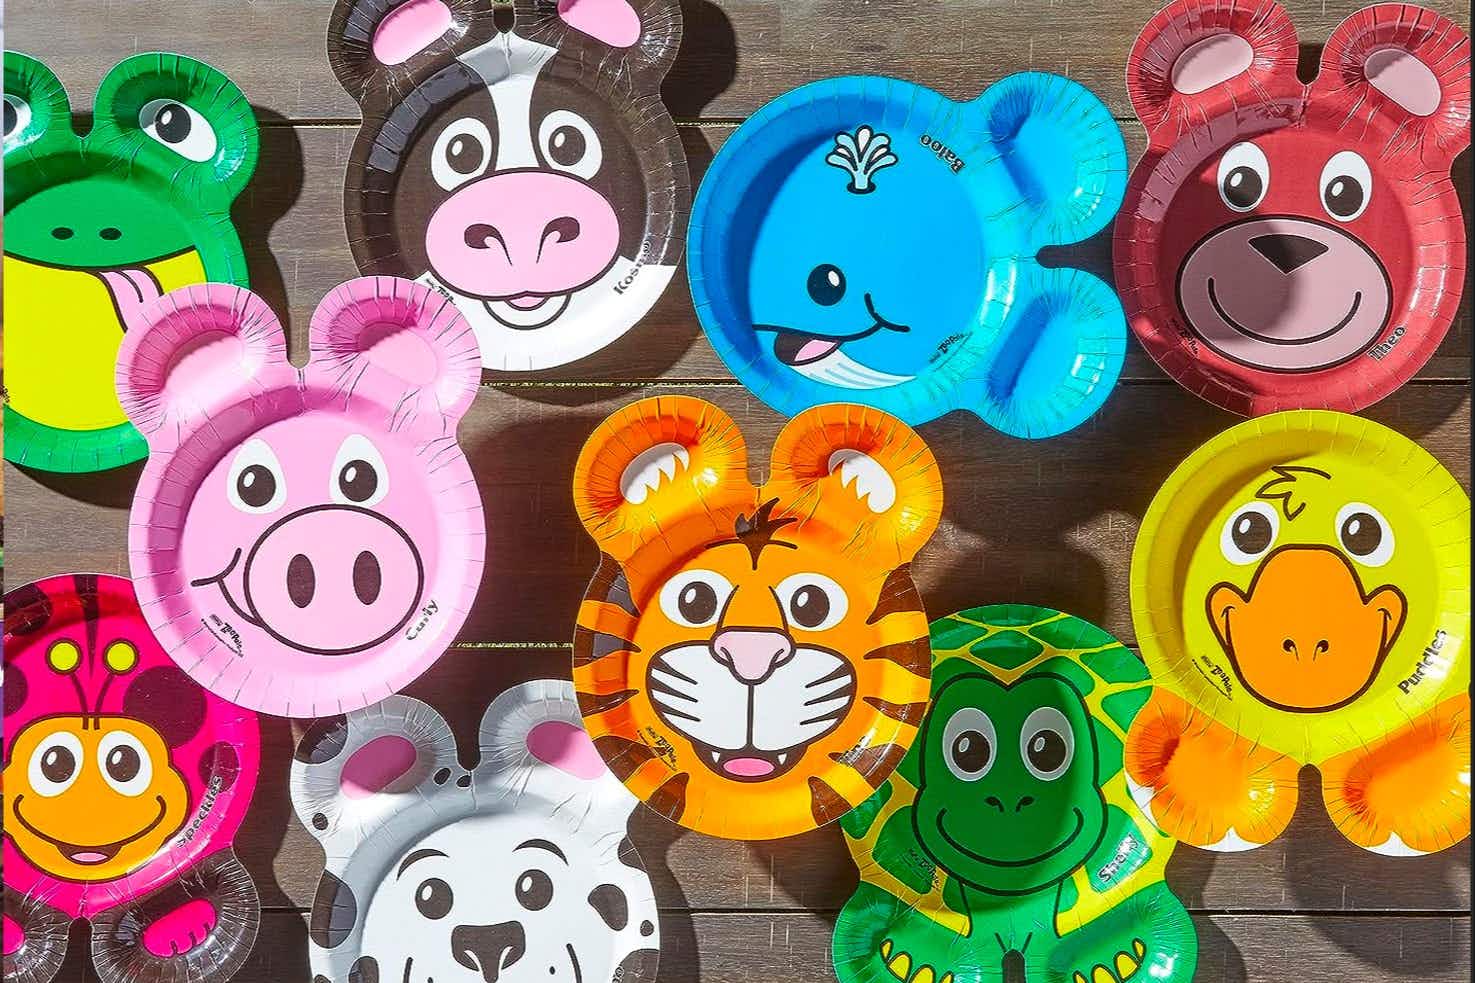 Hefty Zoo Pals Paper Plates, as Low as $4.89 on Amazon